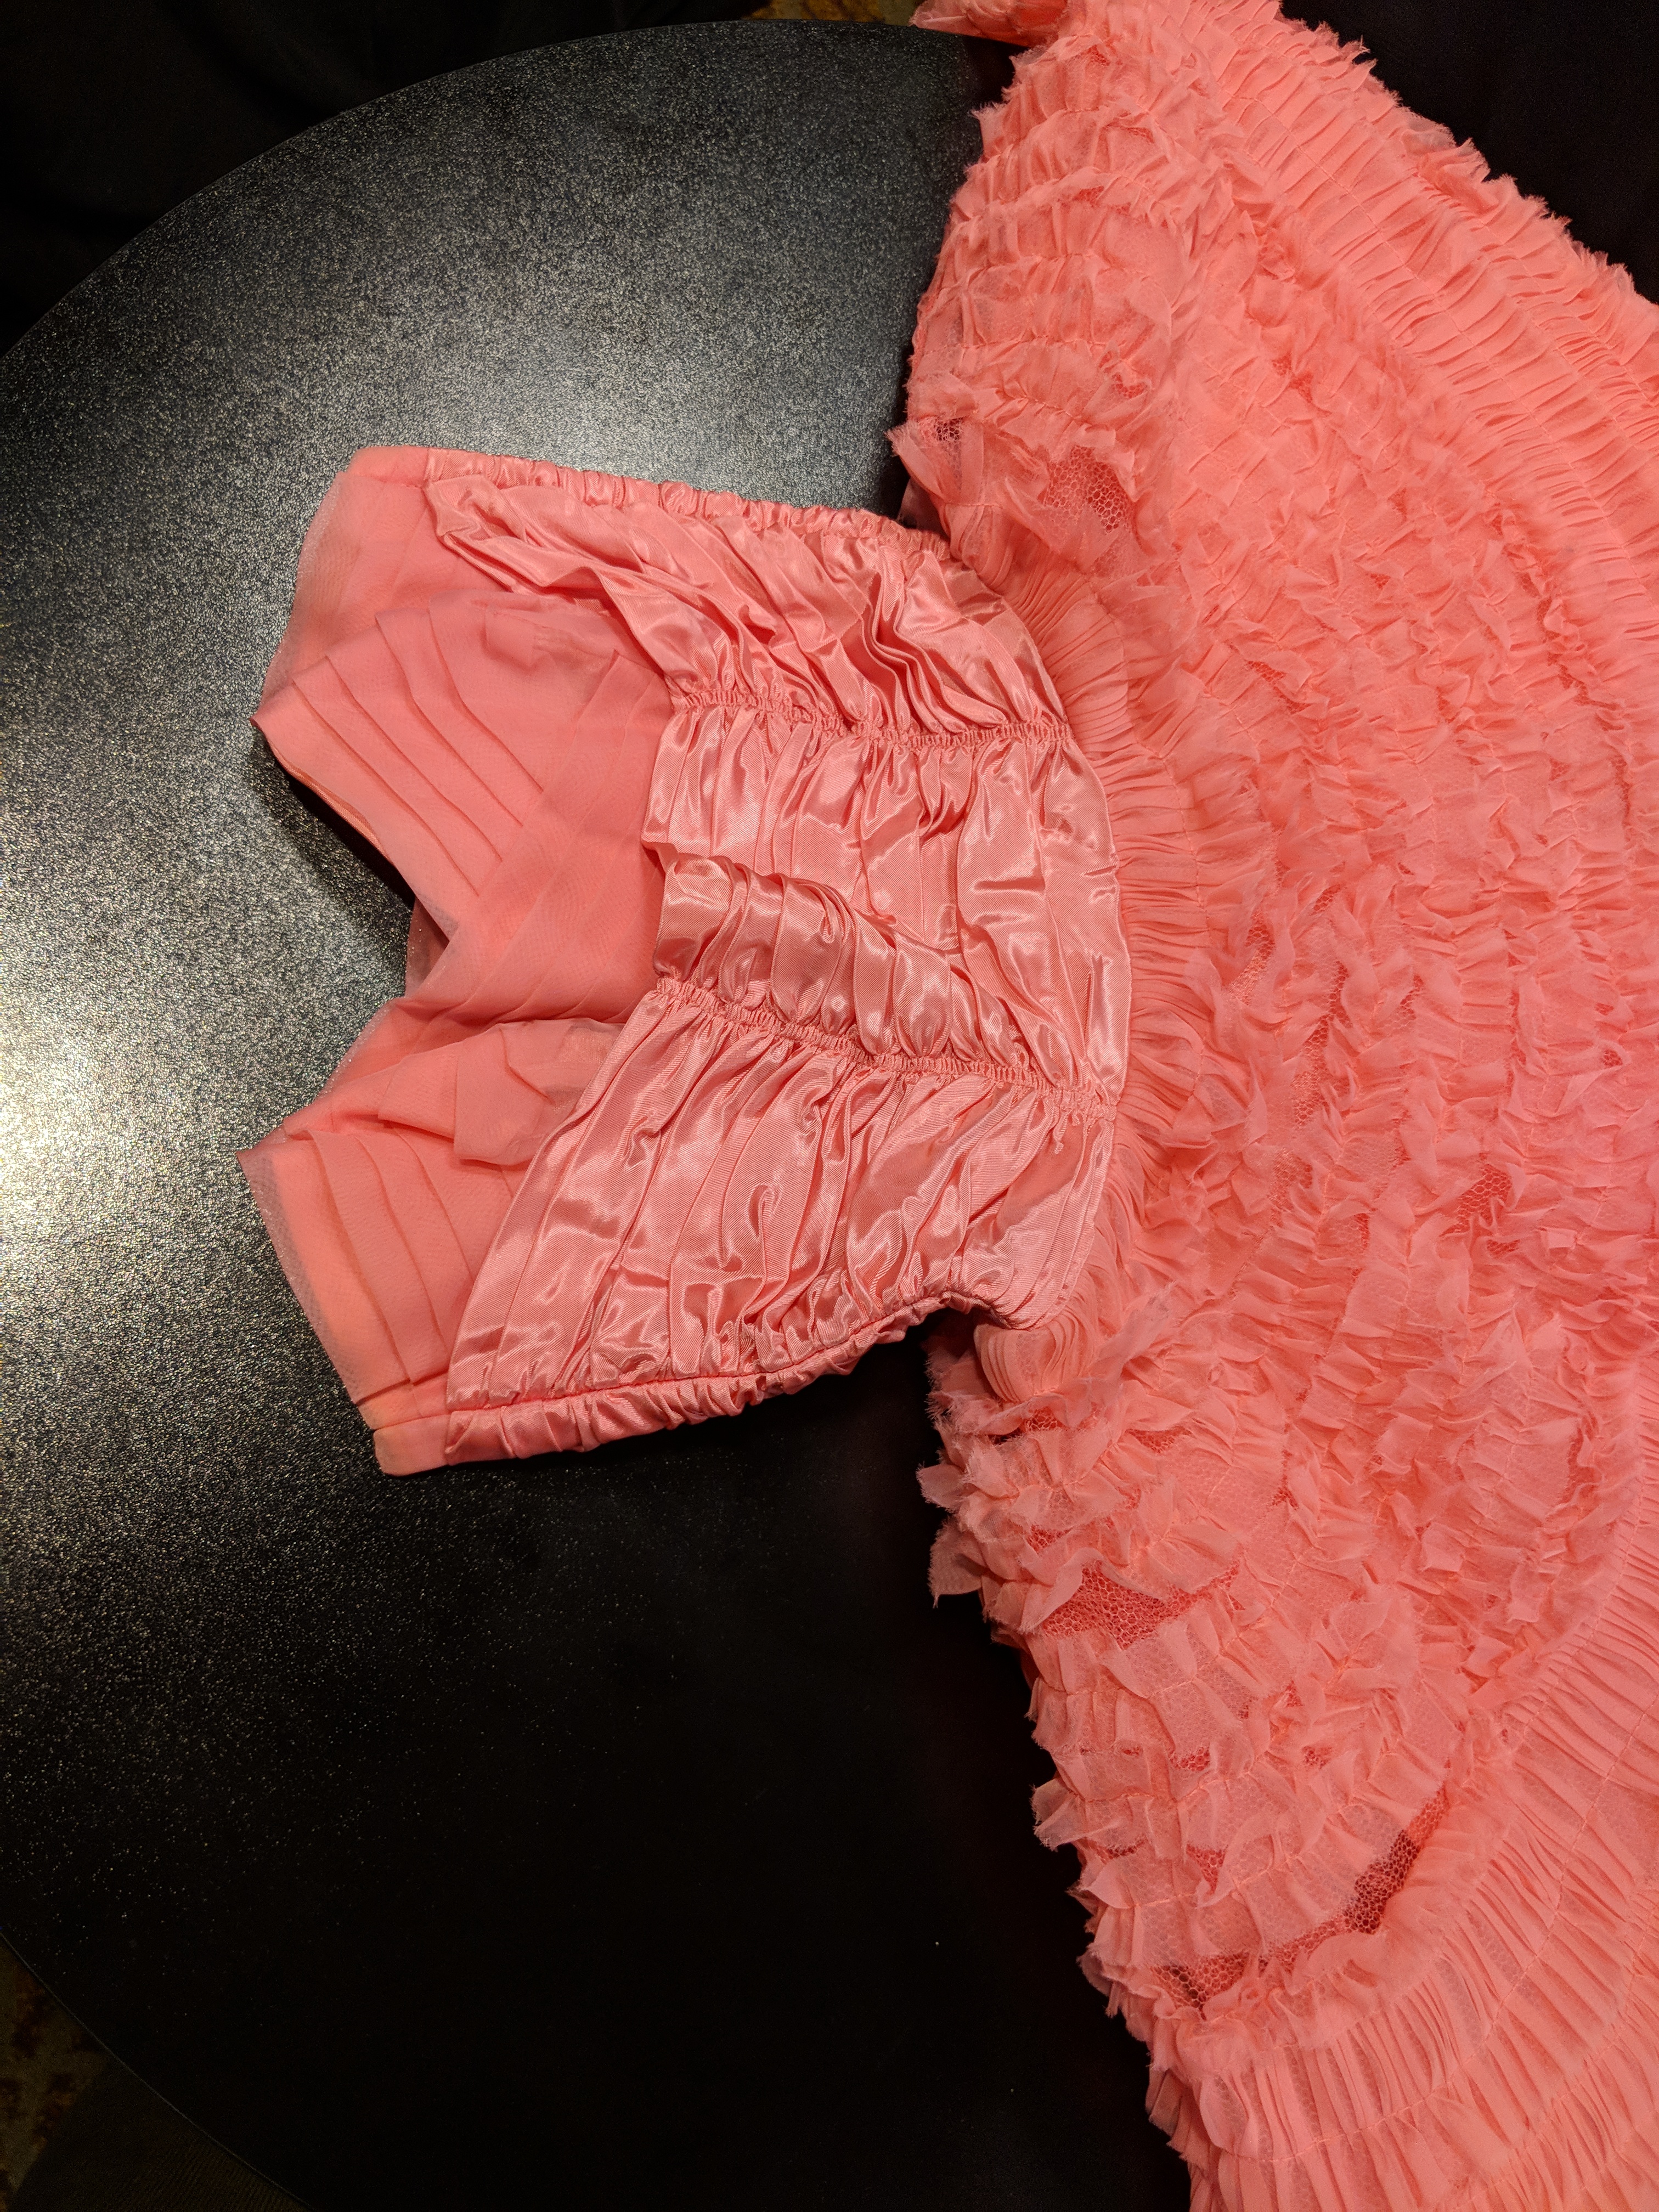 Pink formal dress from high school dance from St. Louis exhibit